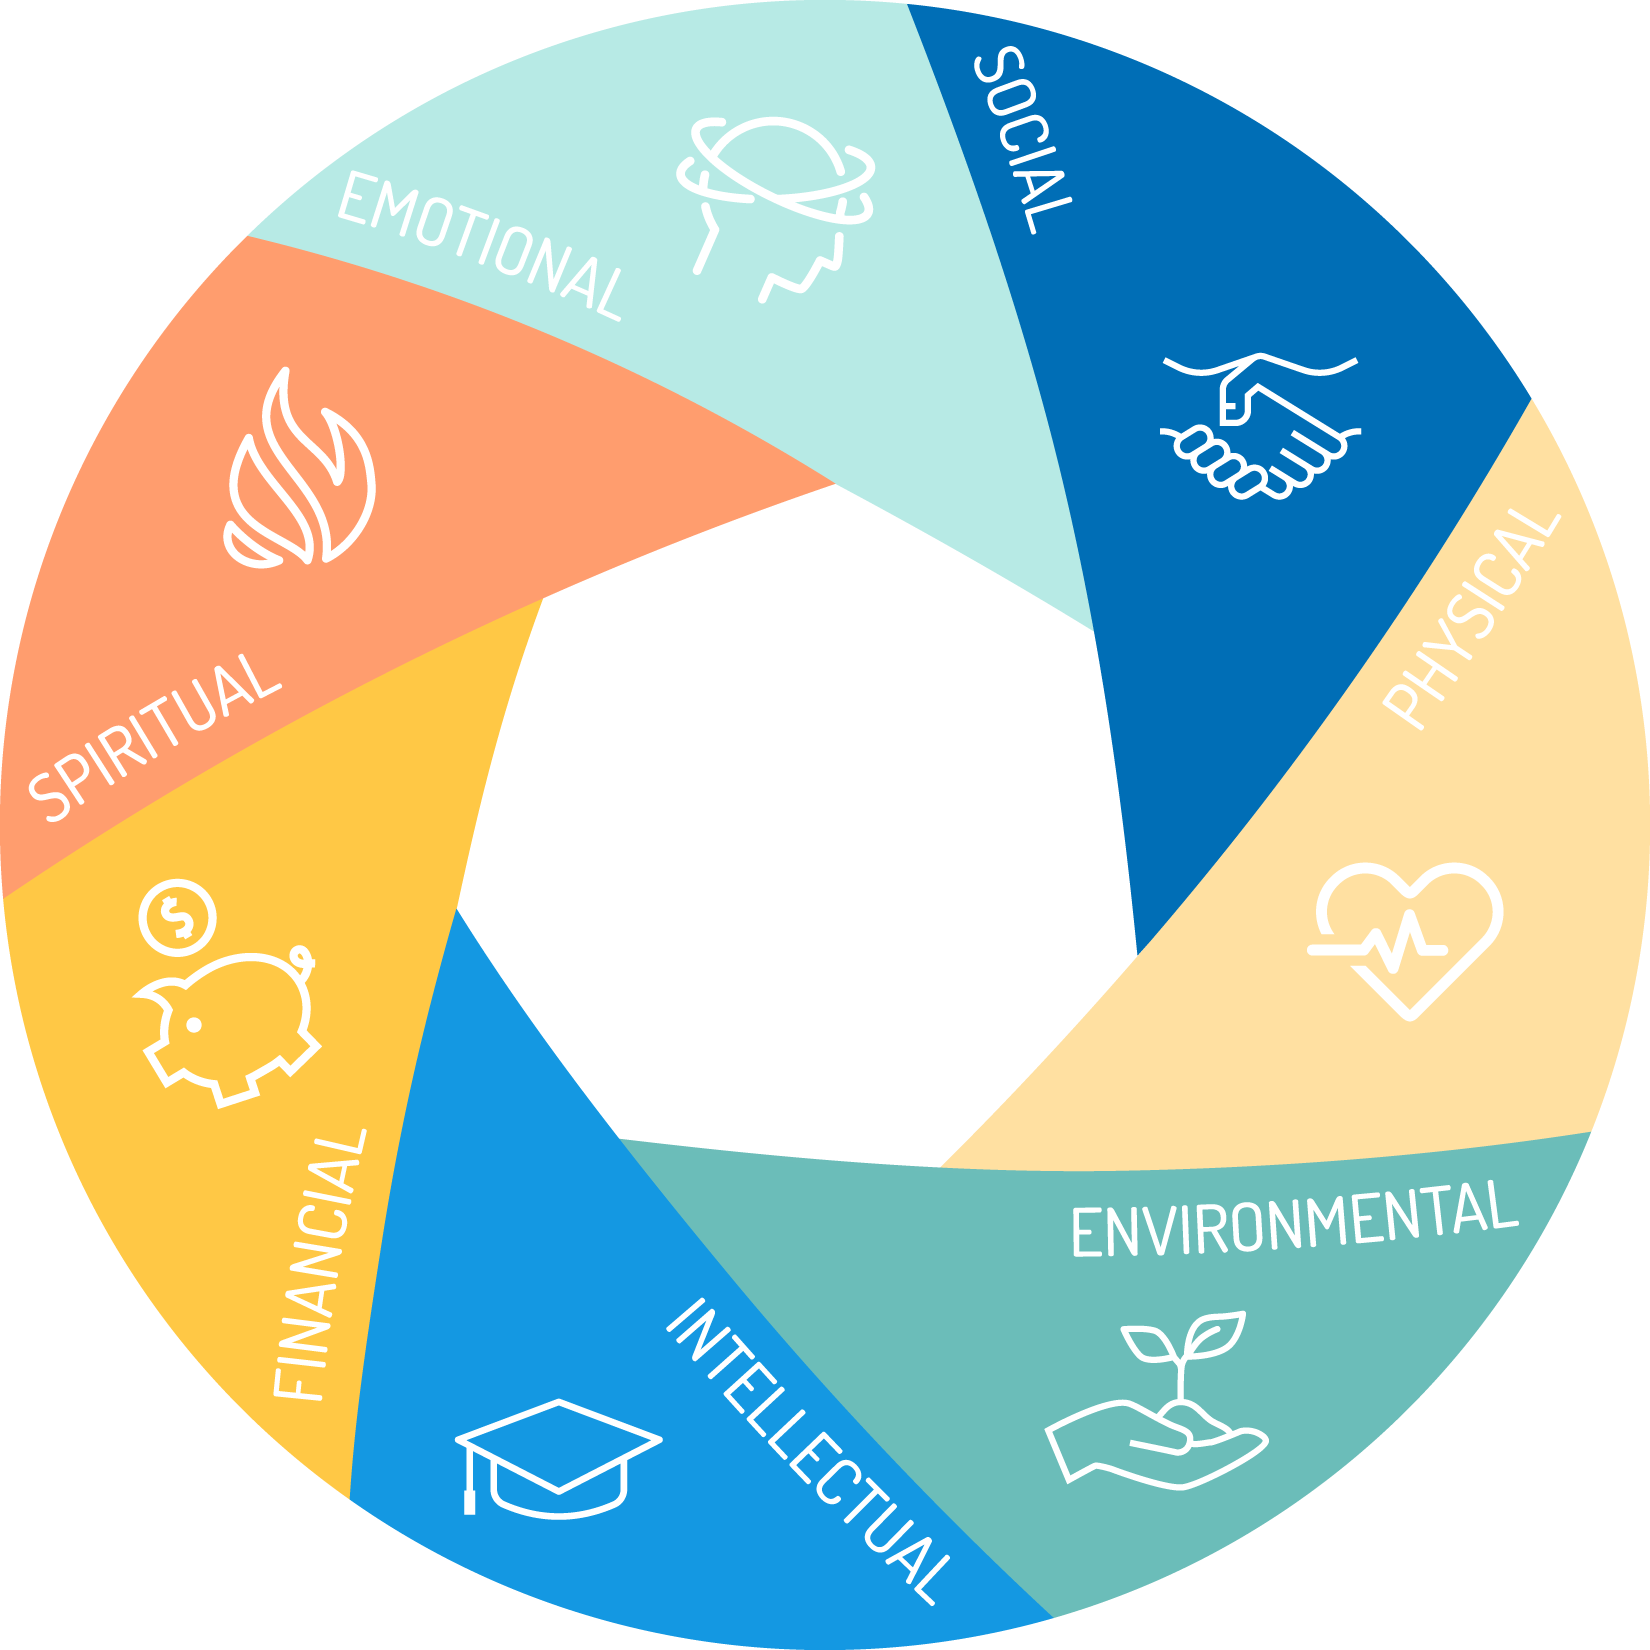 Wellbeing Wheel graphic with icons representing each of the 7 dimensions of wellbeing: physical, spiritual, intellectual, environmental, financial, social, and emotional.